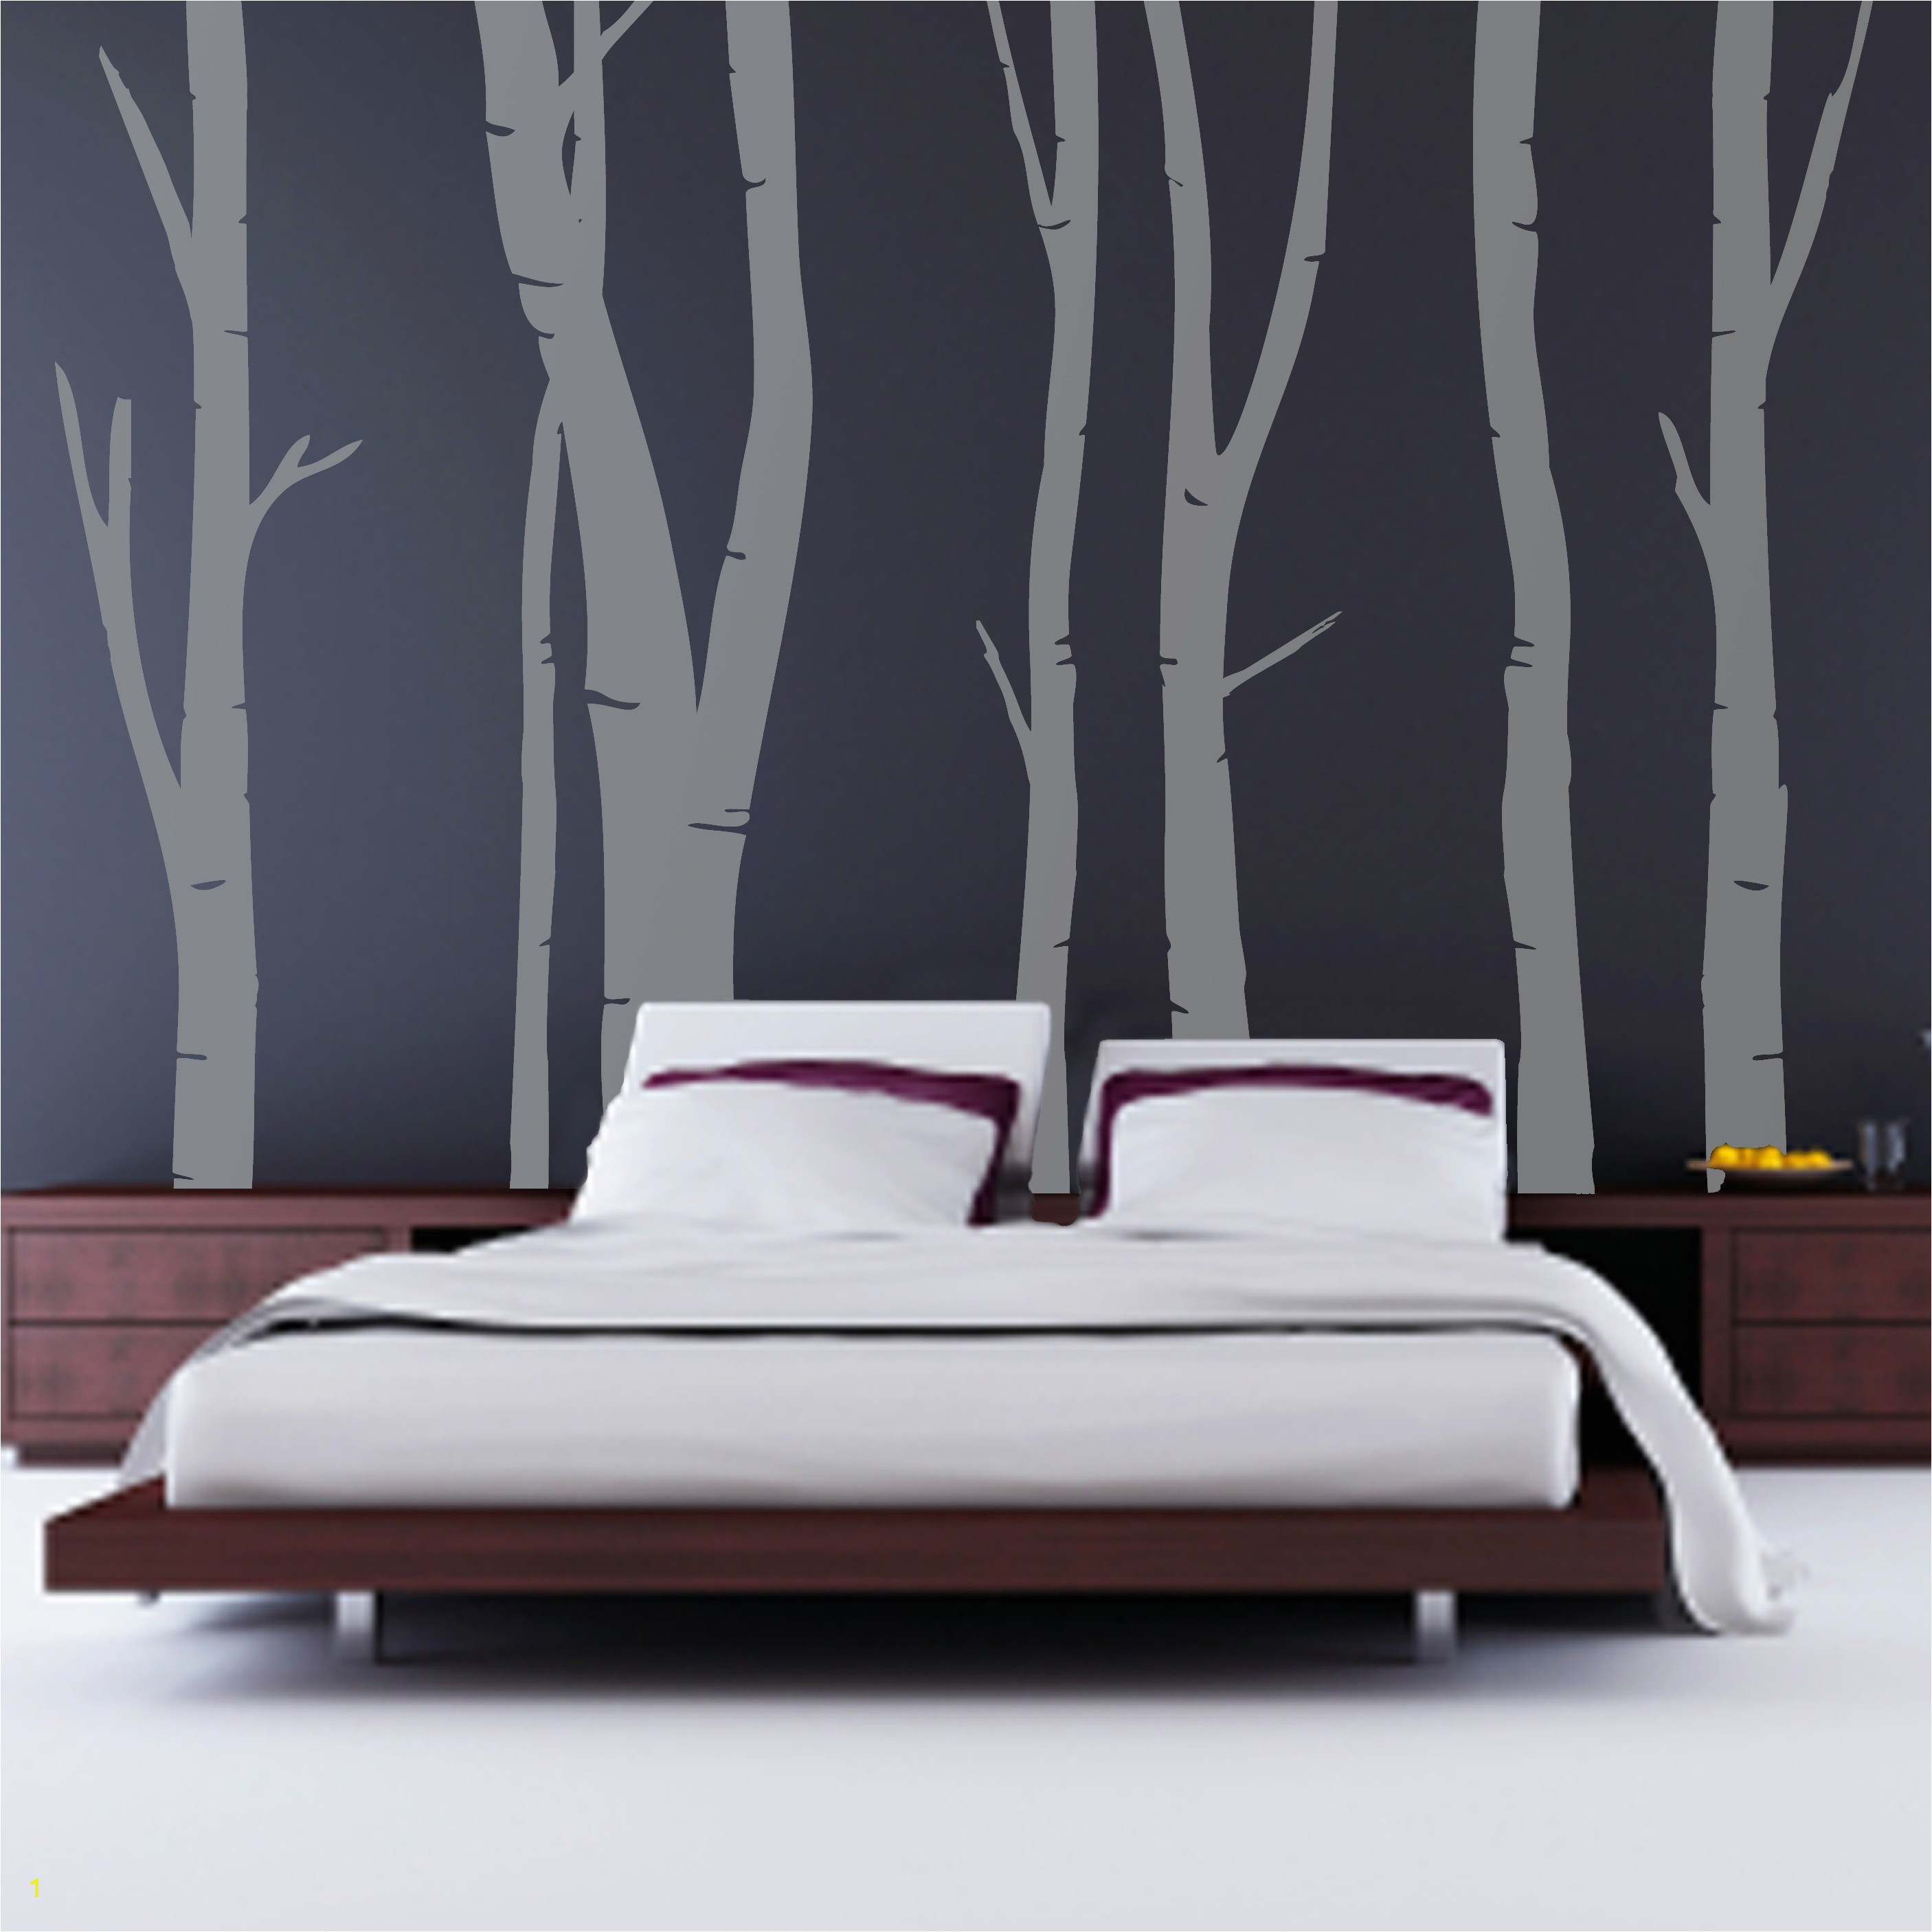 Cheap Wall Murals for Sale Wall Decals for Bedroom Unique 1 Kirkland Wall Decor Home Design 0d